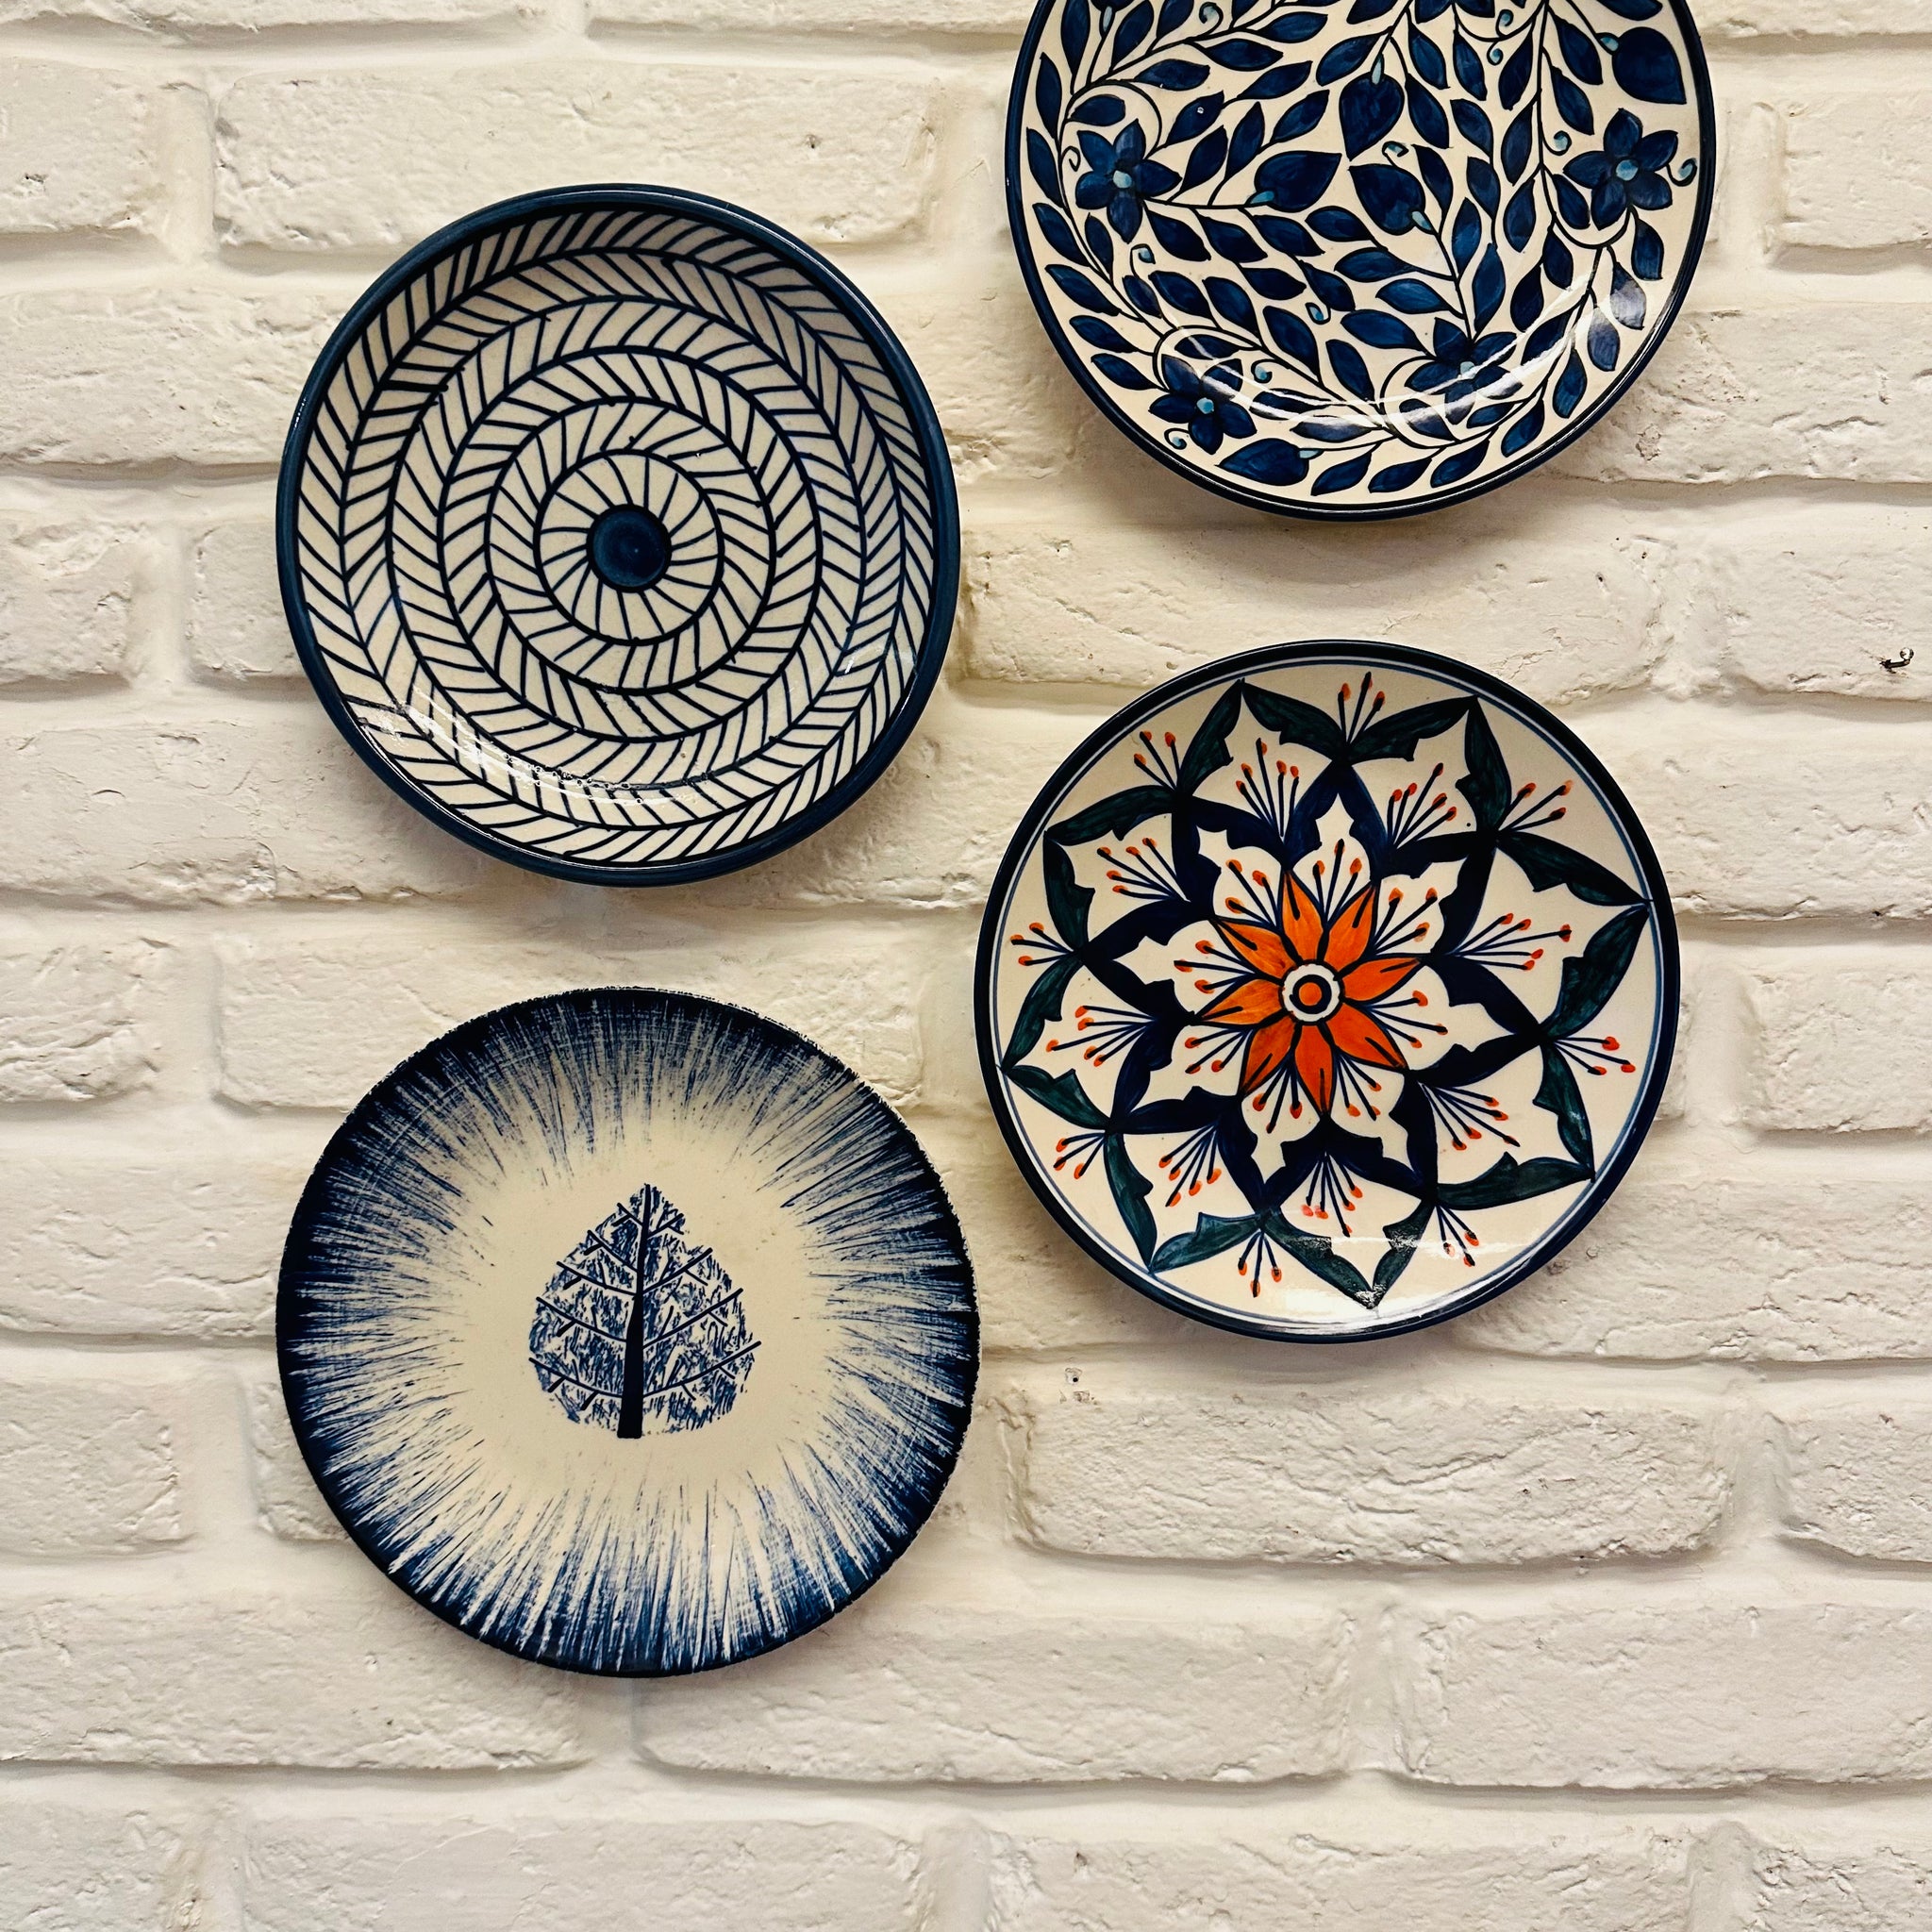  Artisanal Wall Plate Collection, Bedroom Wall Plate Ensemble, Classical Appeal Wall Décor, Classical Indian Wall Décor, Designer Wall Plate Set, Hand Painted Artisanal Plates, Handcrafted Home Accents, Handcrafted Indian Artisans, Indigo Hand Painted Wall Plates, Small Batch High-Quality Décor, Unique Handcrafted Wall Plates Unique Living Room Décor, Vibrant Indigo Wall Art, Vibrant Wall Accent Pieces, Wall Hanging Hook Included, tesu